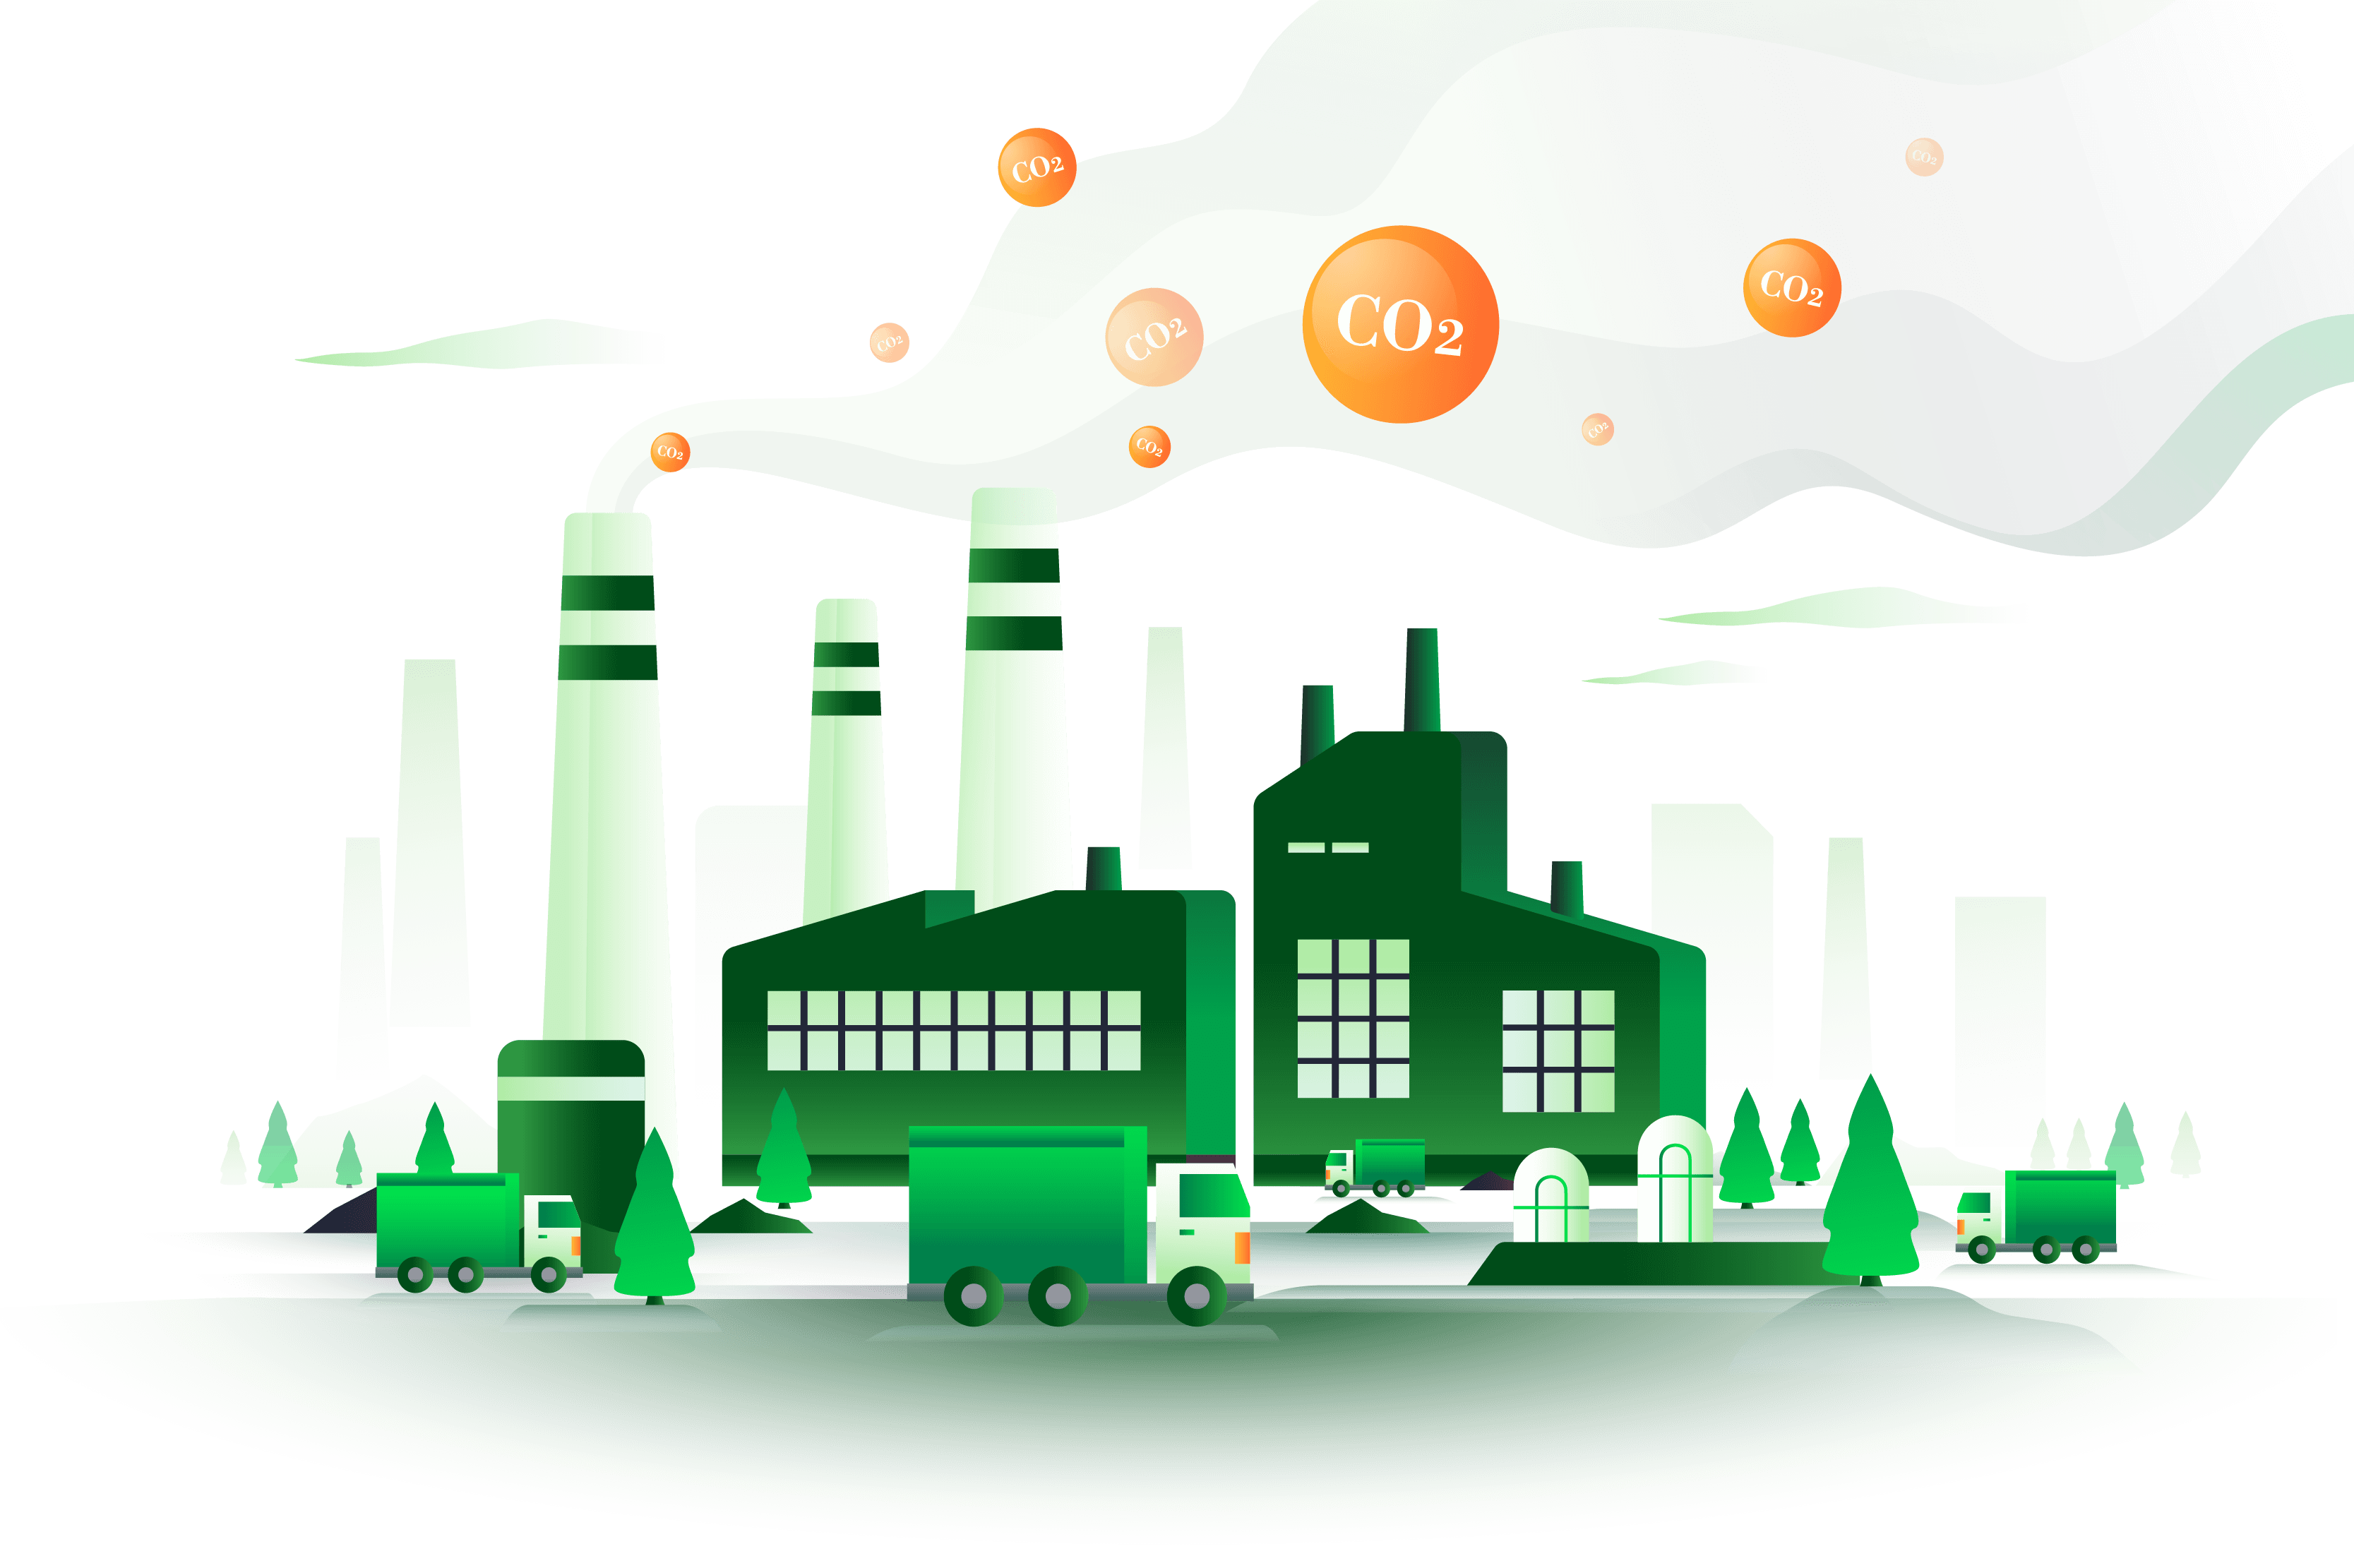 Illustration depicting the emission of CO2 from an environment, industry, and transportation sources. The illustration portrays a visual representation of an environment with trees, a factory symbolizing industry, and vehicles symbolizing transportation emitting CO2.  The representation of the environment signifies the natural surroundings and ecosystems. The factory symbolizes industrial activities, and the vehicles represent transportation emissions. CO2 is visually depicted as emissions from these sources.  The illustration aims to visually communicate the concept of CO2 emissions from industrial and transportation sectors, highlighting their impact on the environment and contributing to climate change. It underscores the need for sustainable practices and efforts to reduce carbon emissions in these sectors for a healthier and more sustainable planet.